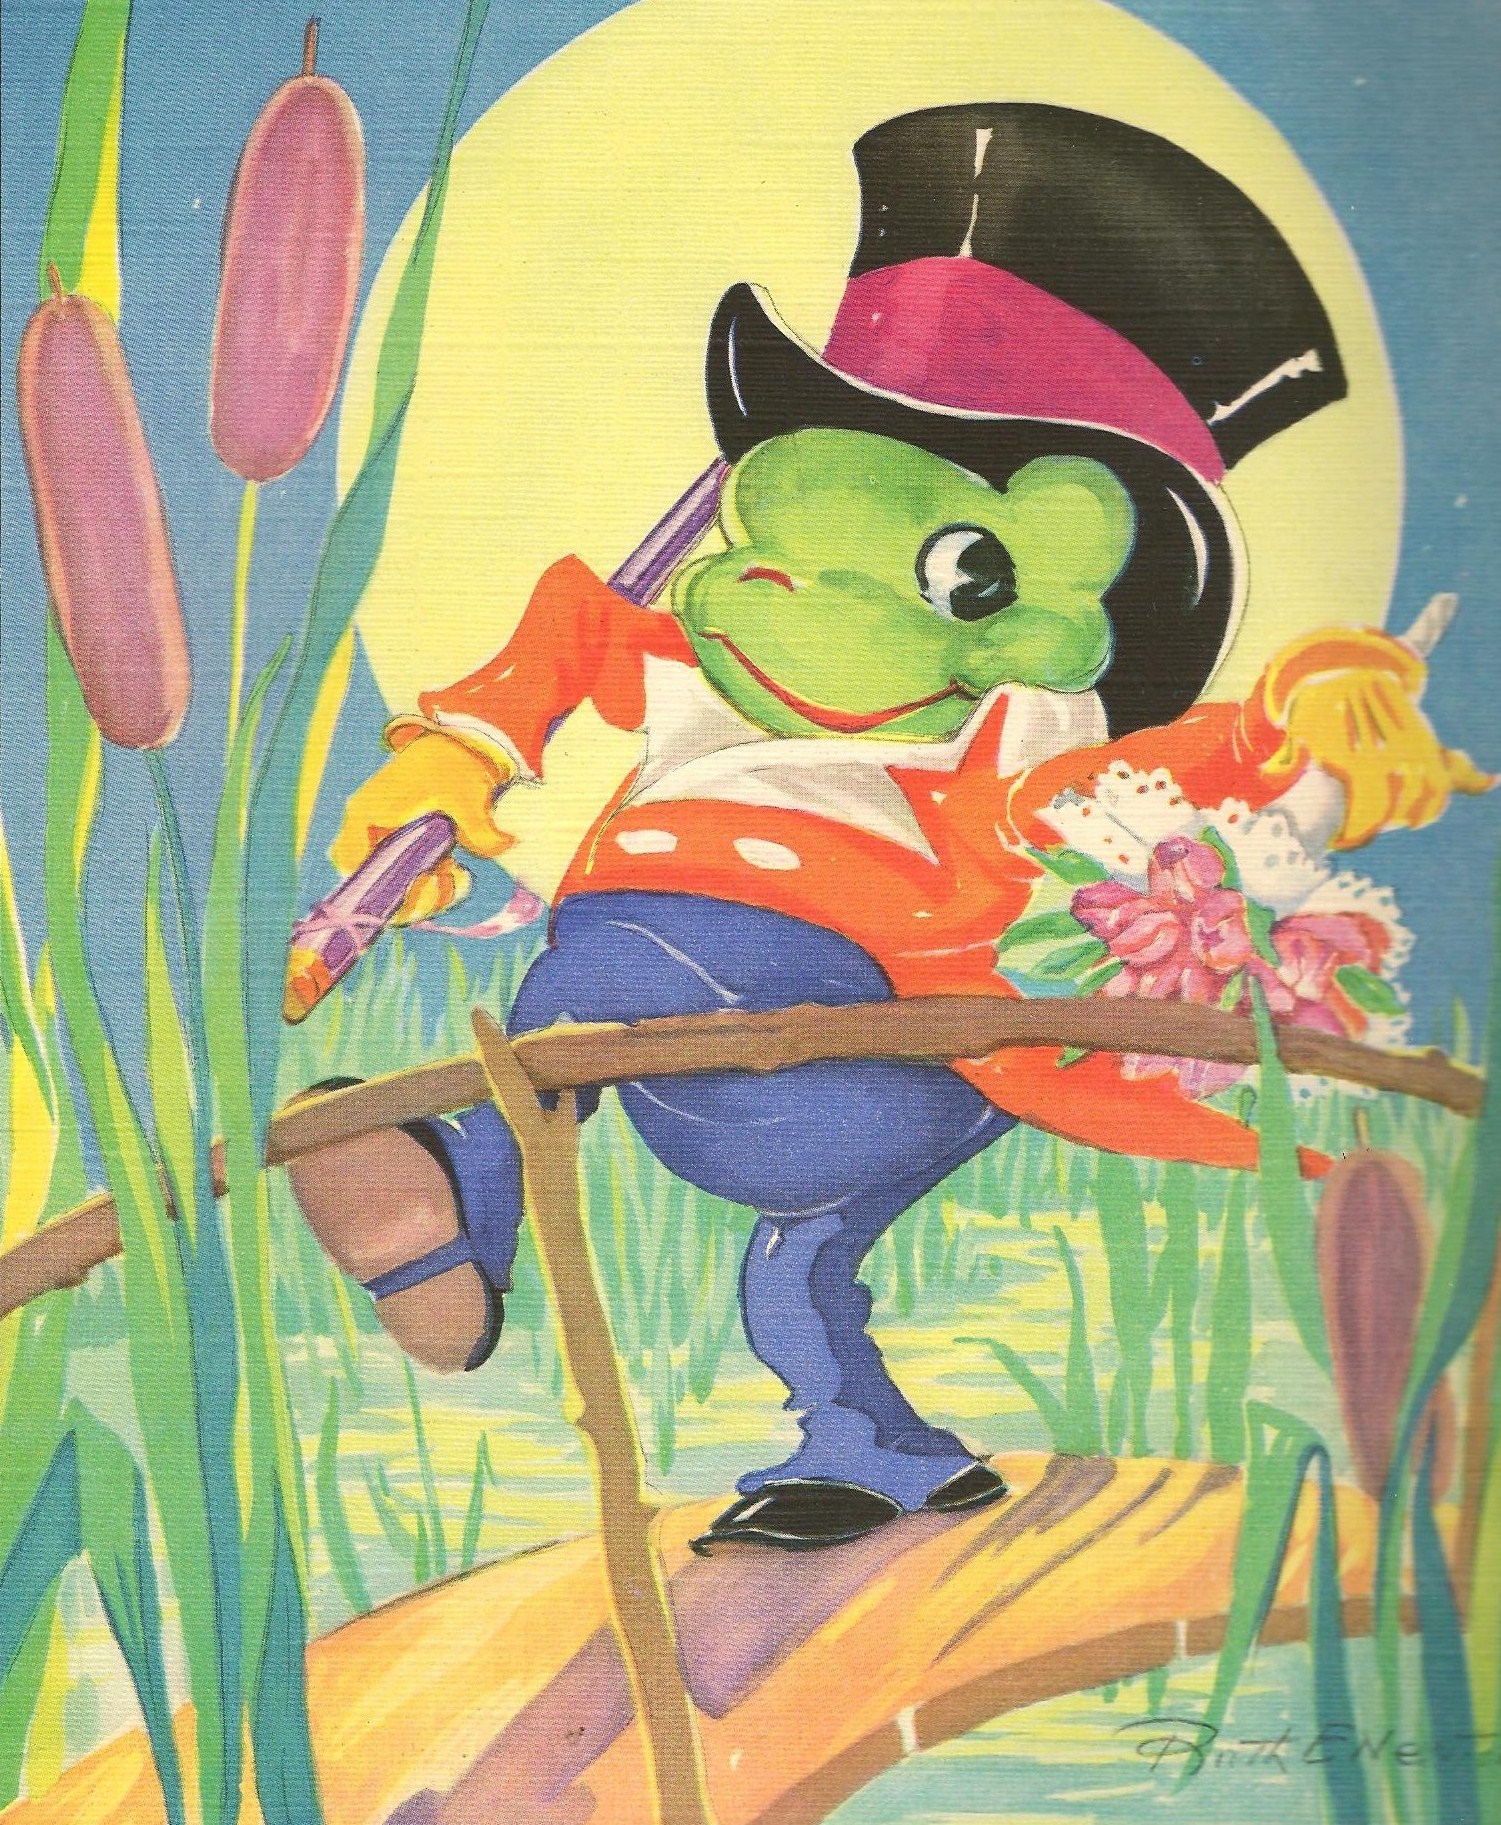 the frog in hat is sitting on the side of a swamp